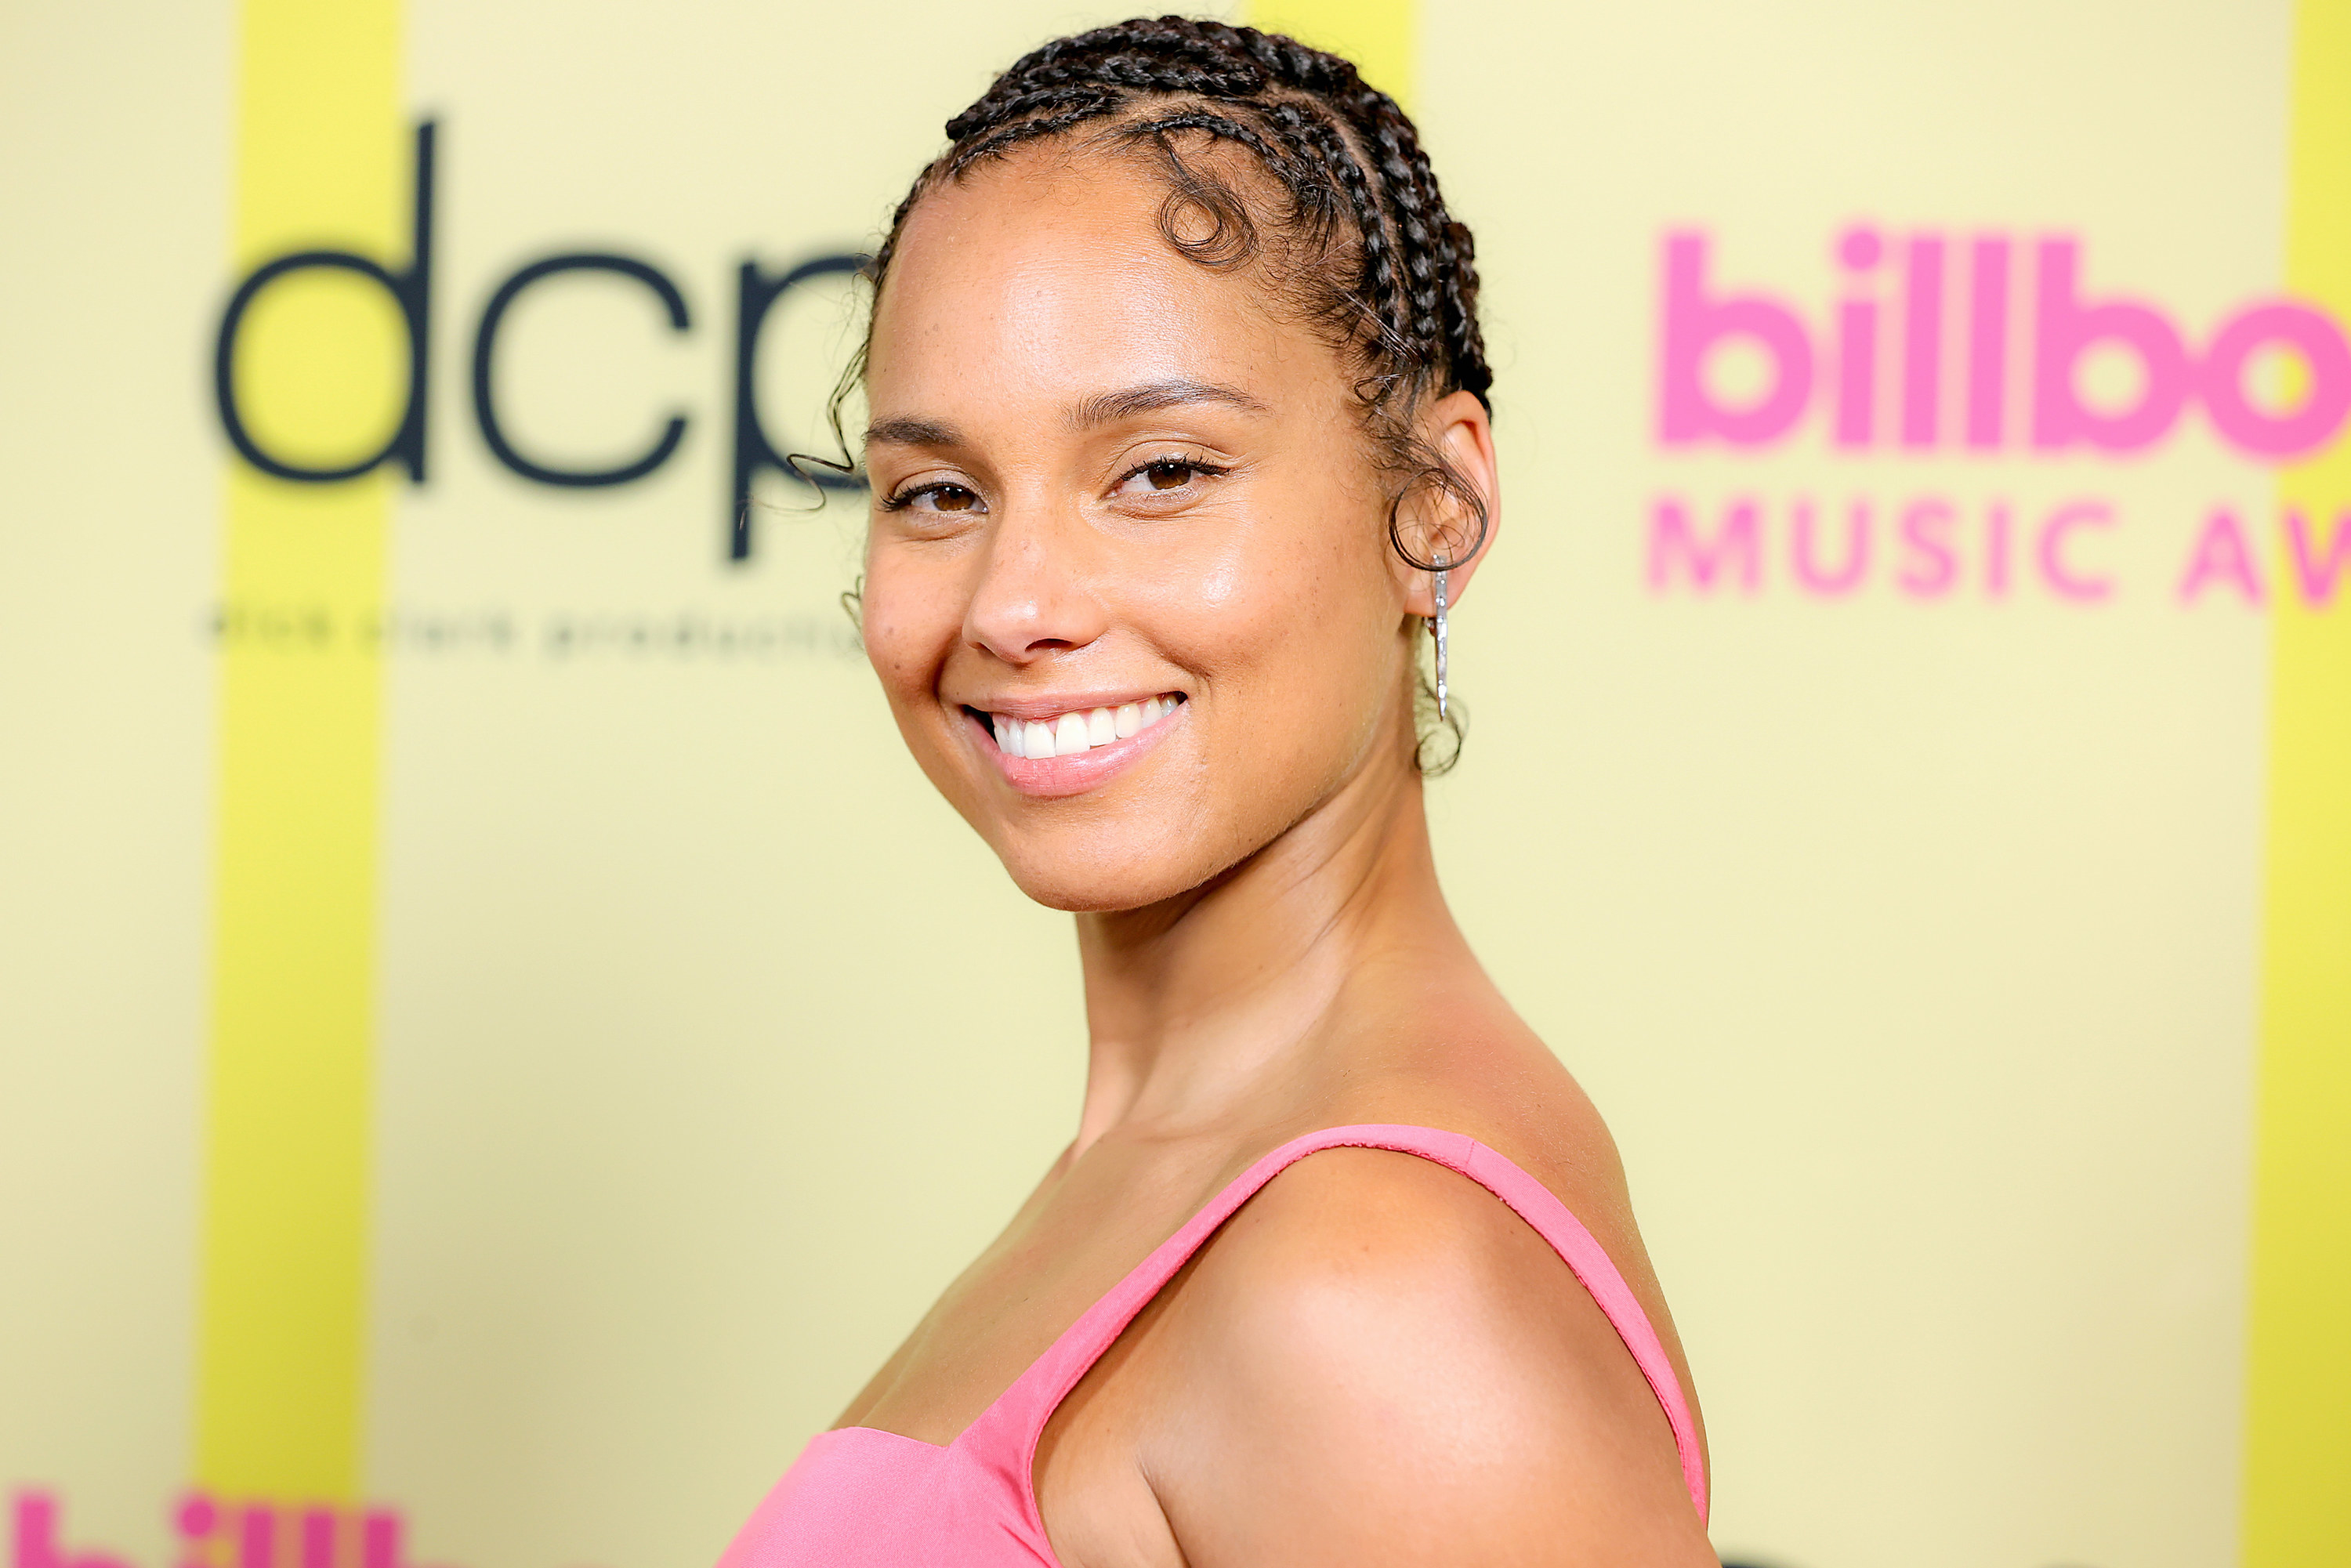 Alicia keys in a pink dress smiling and looking into the camera.